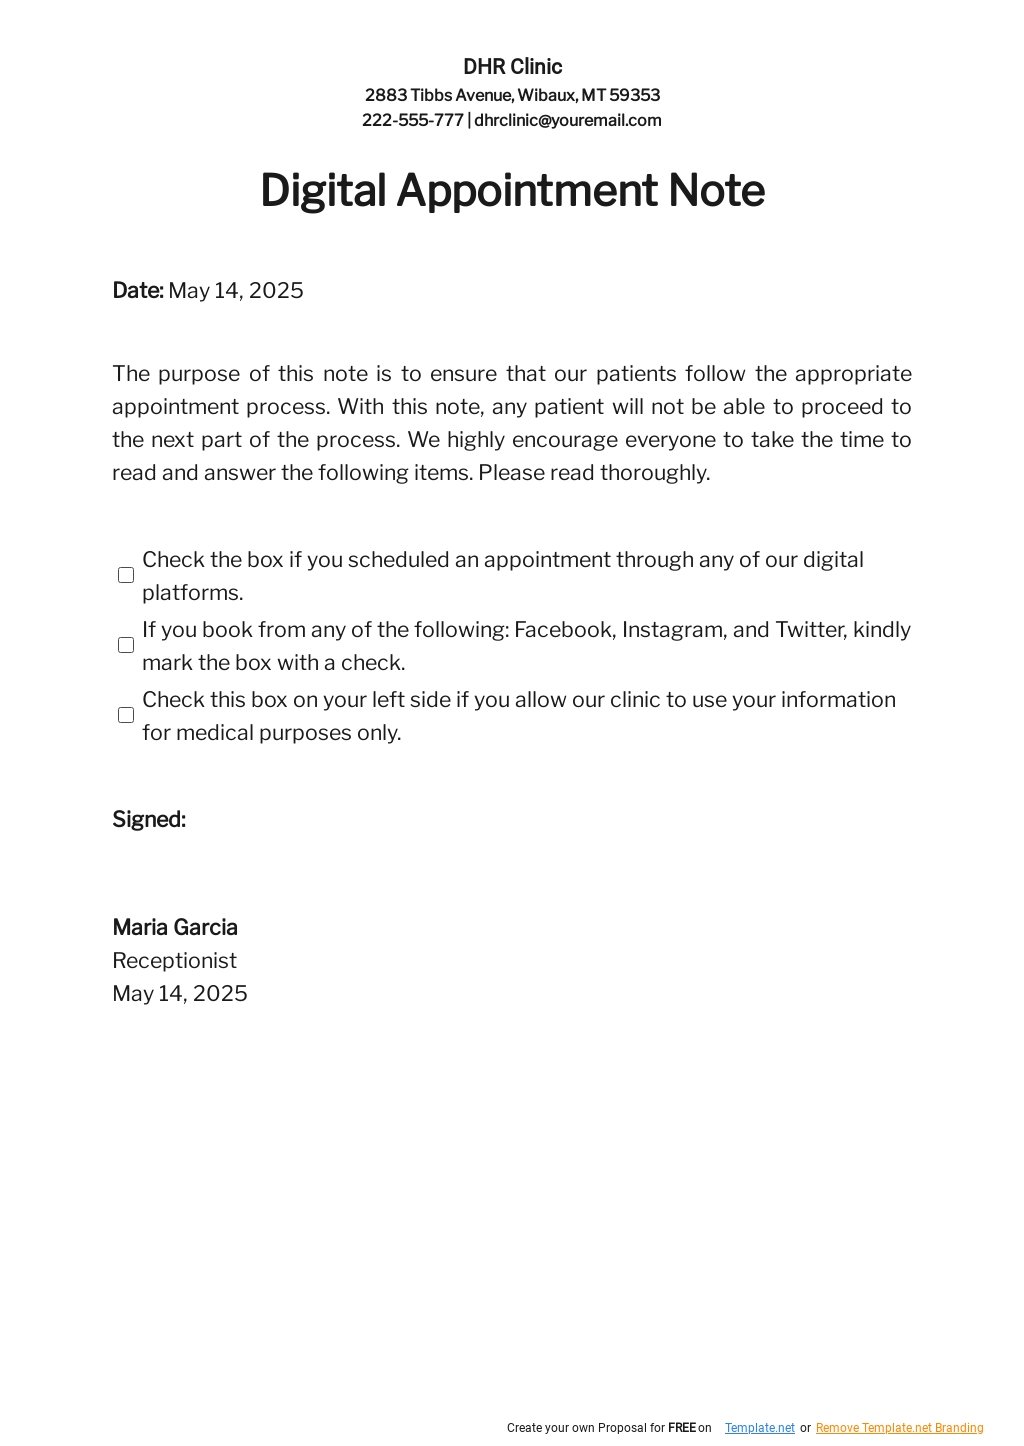 Digital Appointment Notes Template